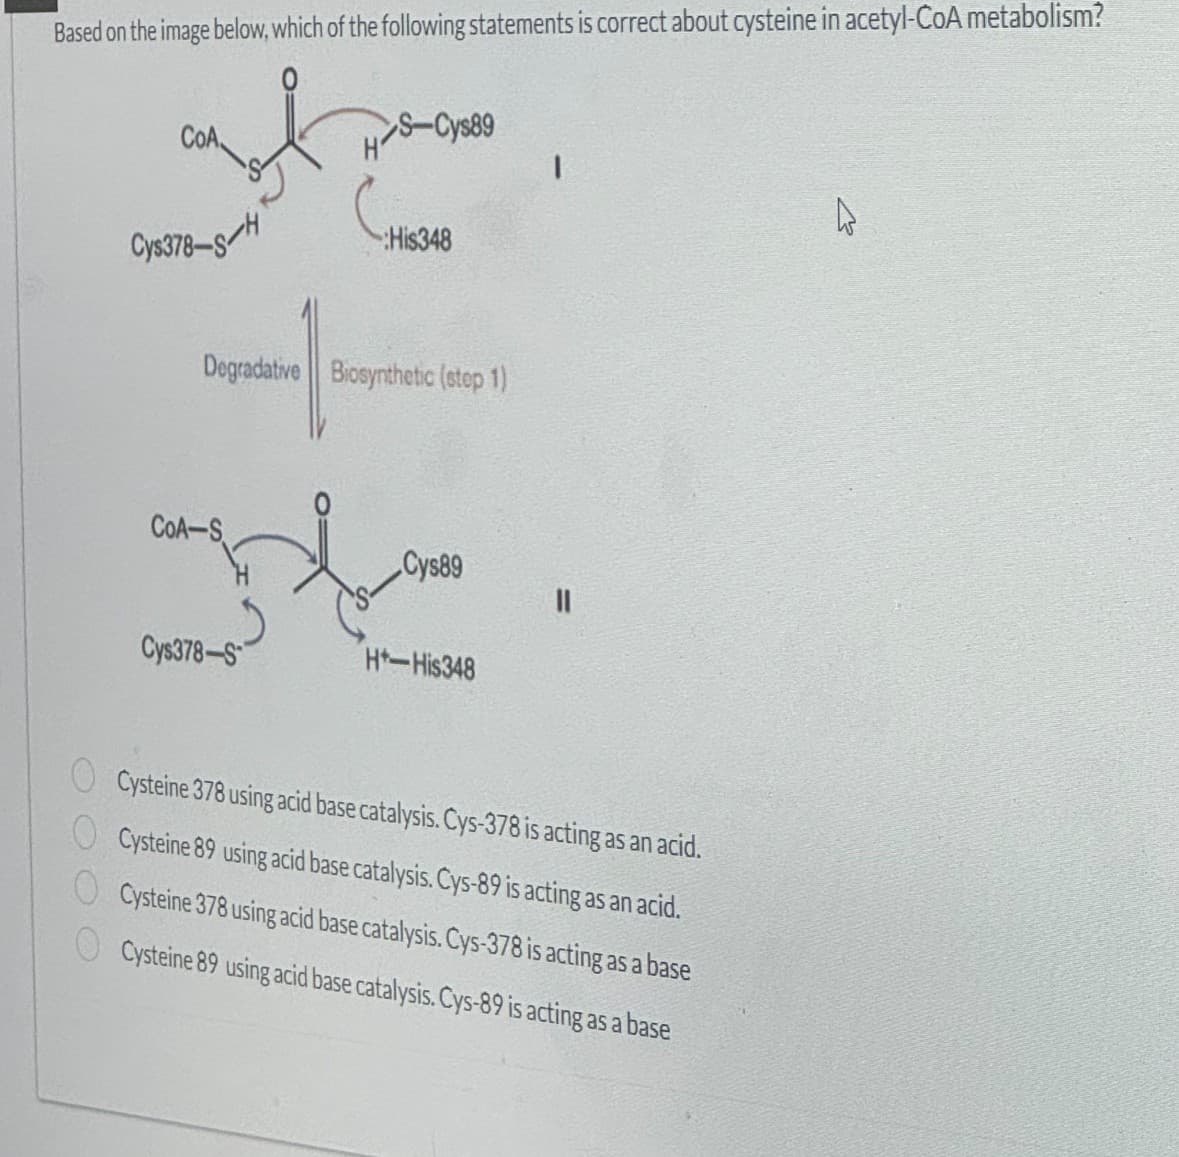 Based on the image below, which of the following statements is correct about cysteine in acetyl-CoA metabolism?
CoA
H-S-Cys89
1
Cys378-S
His348
Degradative || Biosynthetic (step (1)
COA-S
Cys89
Cys378-S
* His348
Cysteine 378 using acid base catalysis. Cys-378 is acting as an acid.
Cysteine 89 using acid base catalysis. Cys-89 is acting as an acid.
Cysteine 378 using acid base catalysis. Cys-378 is acting as a base
Cysteine 89 using acid base catalysis. Cys-89 is acting as a base